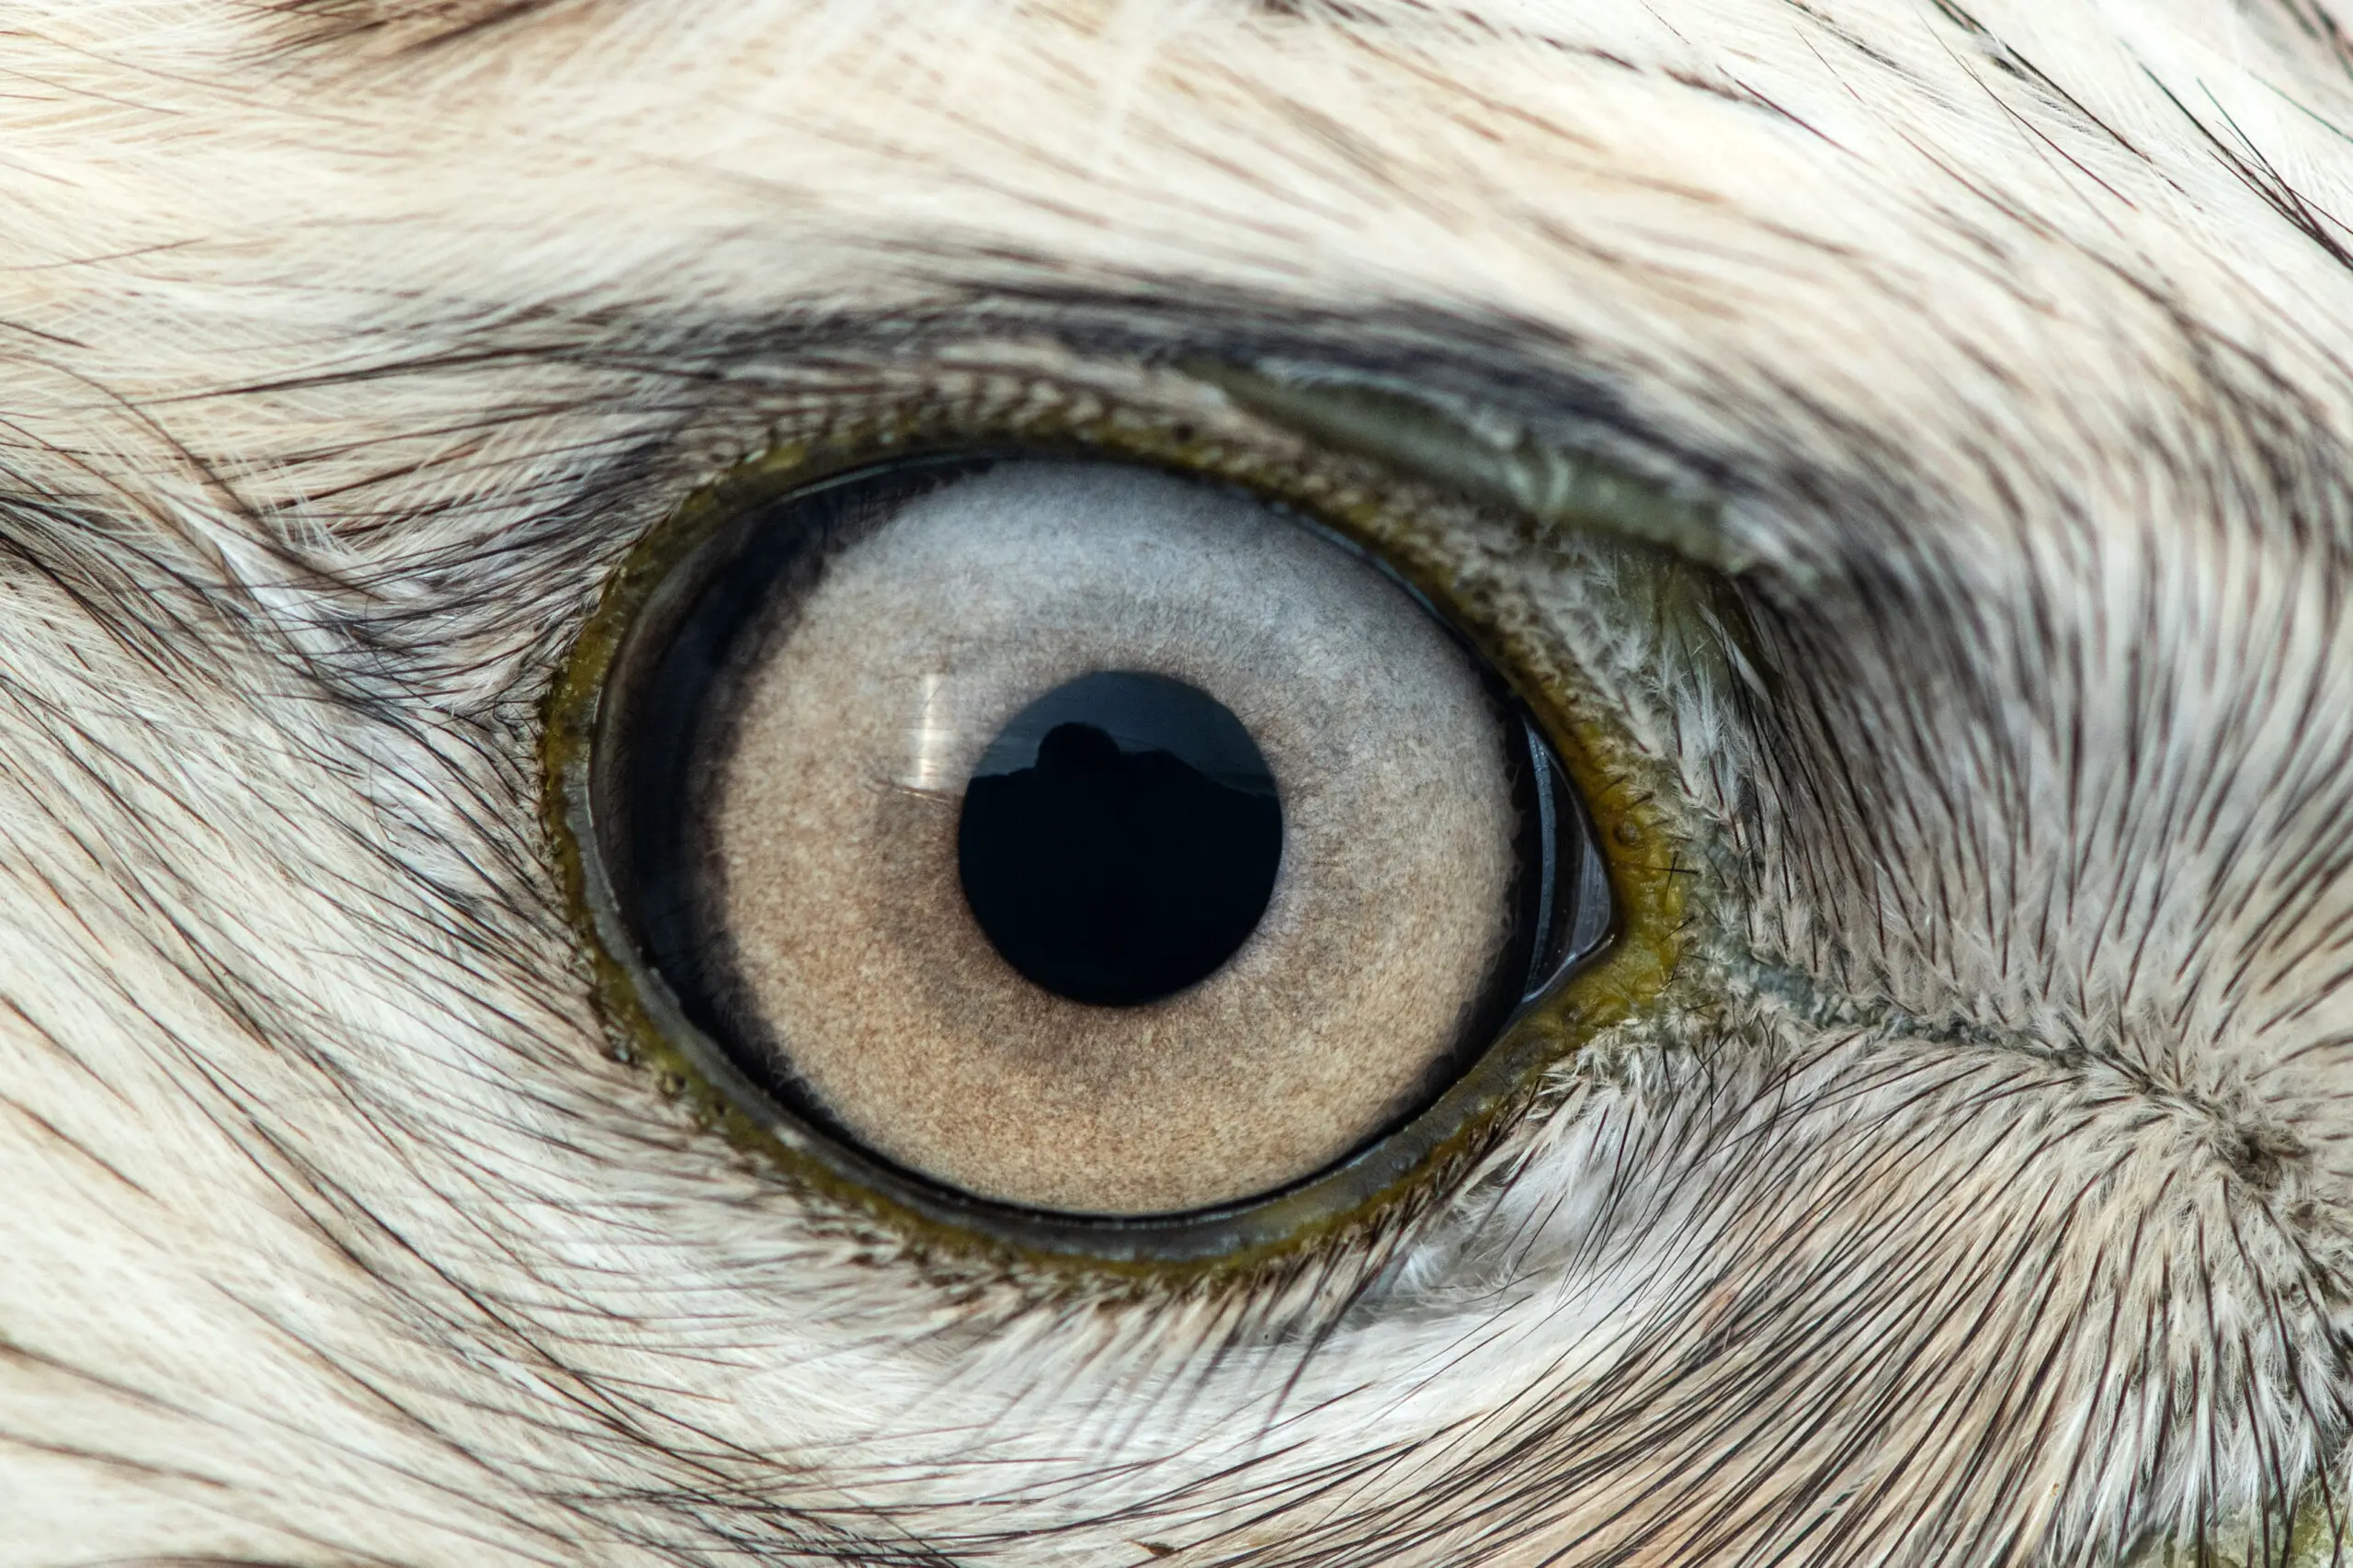 What Are The Cells In Birds Eyes And How Do They Work?